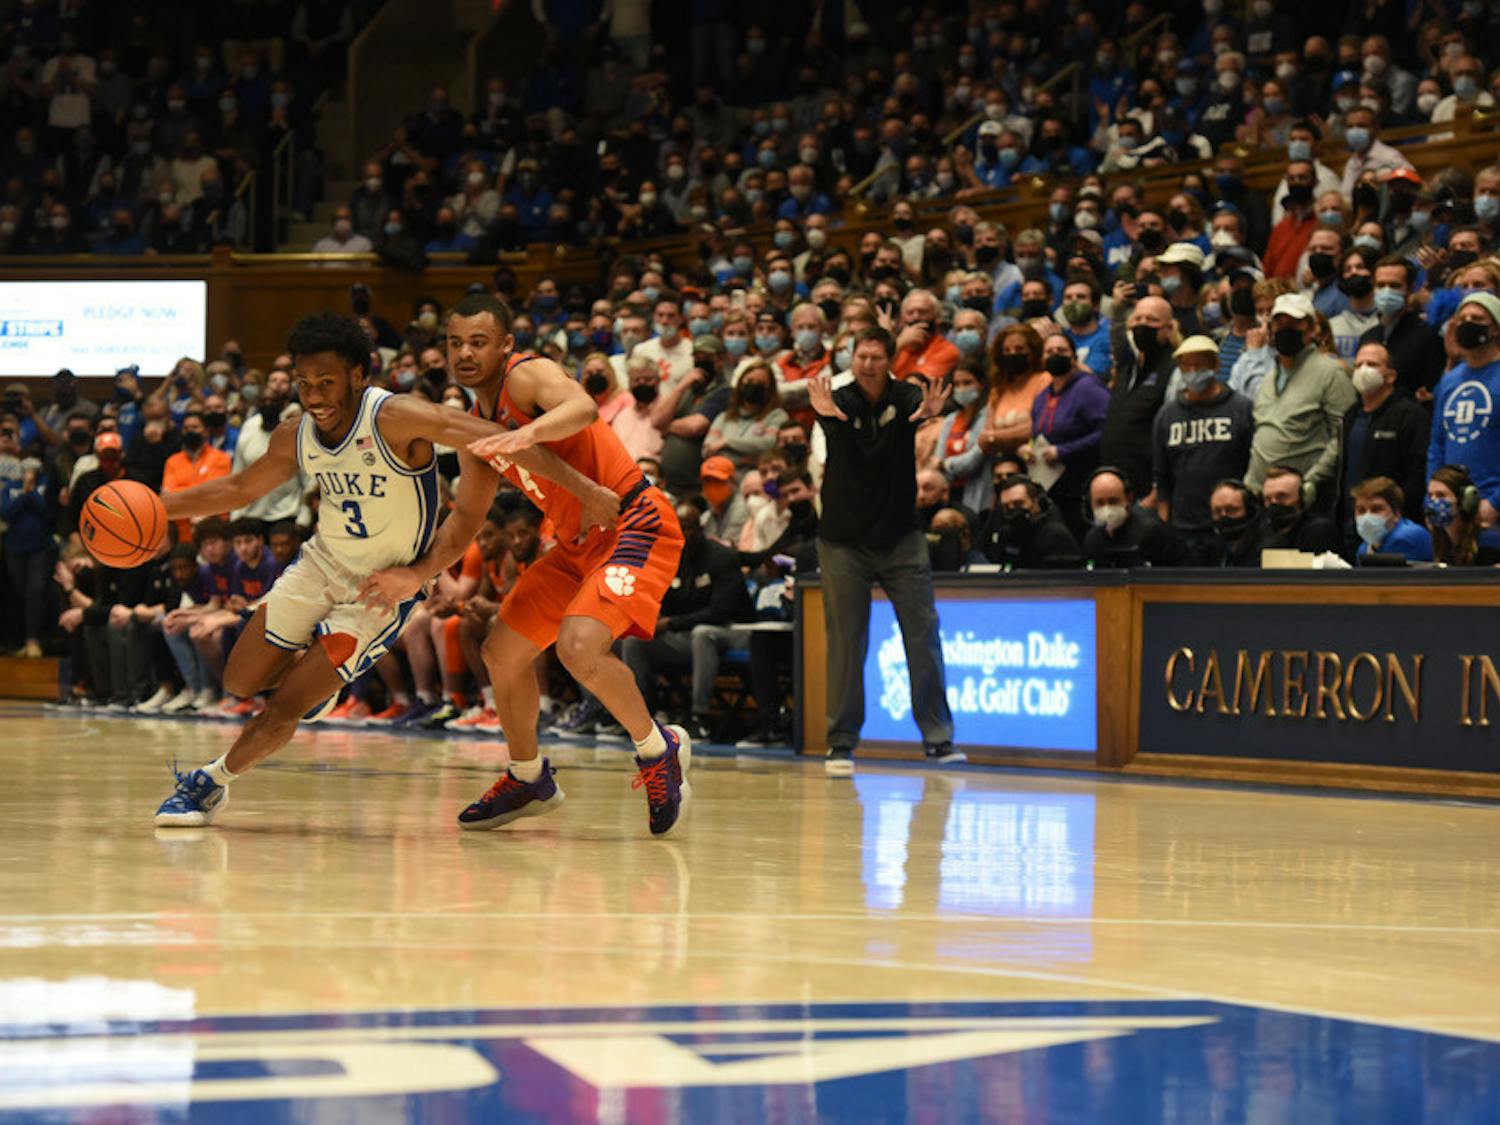 Sophomore guard Jeremy Roach gave Duke a huge spark off the bench in the first half. 